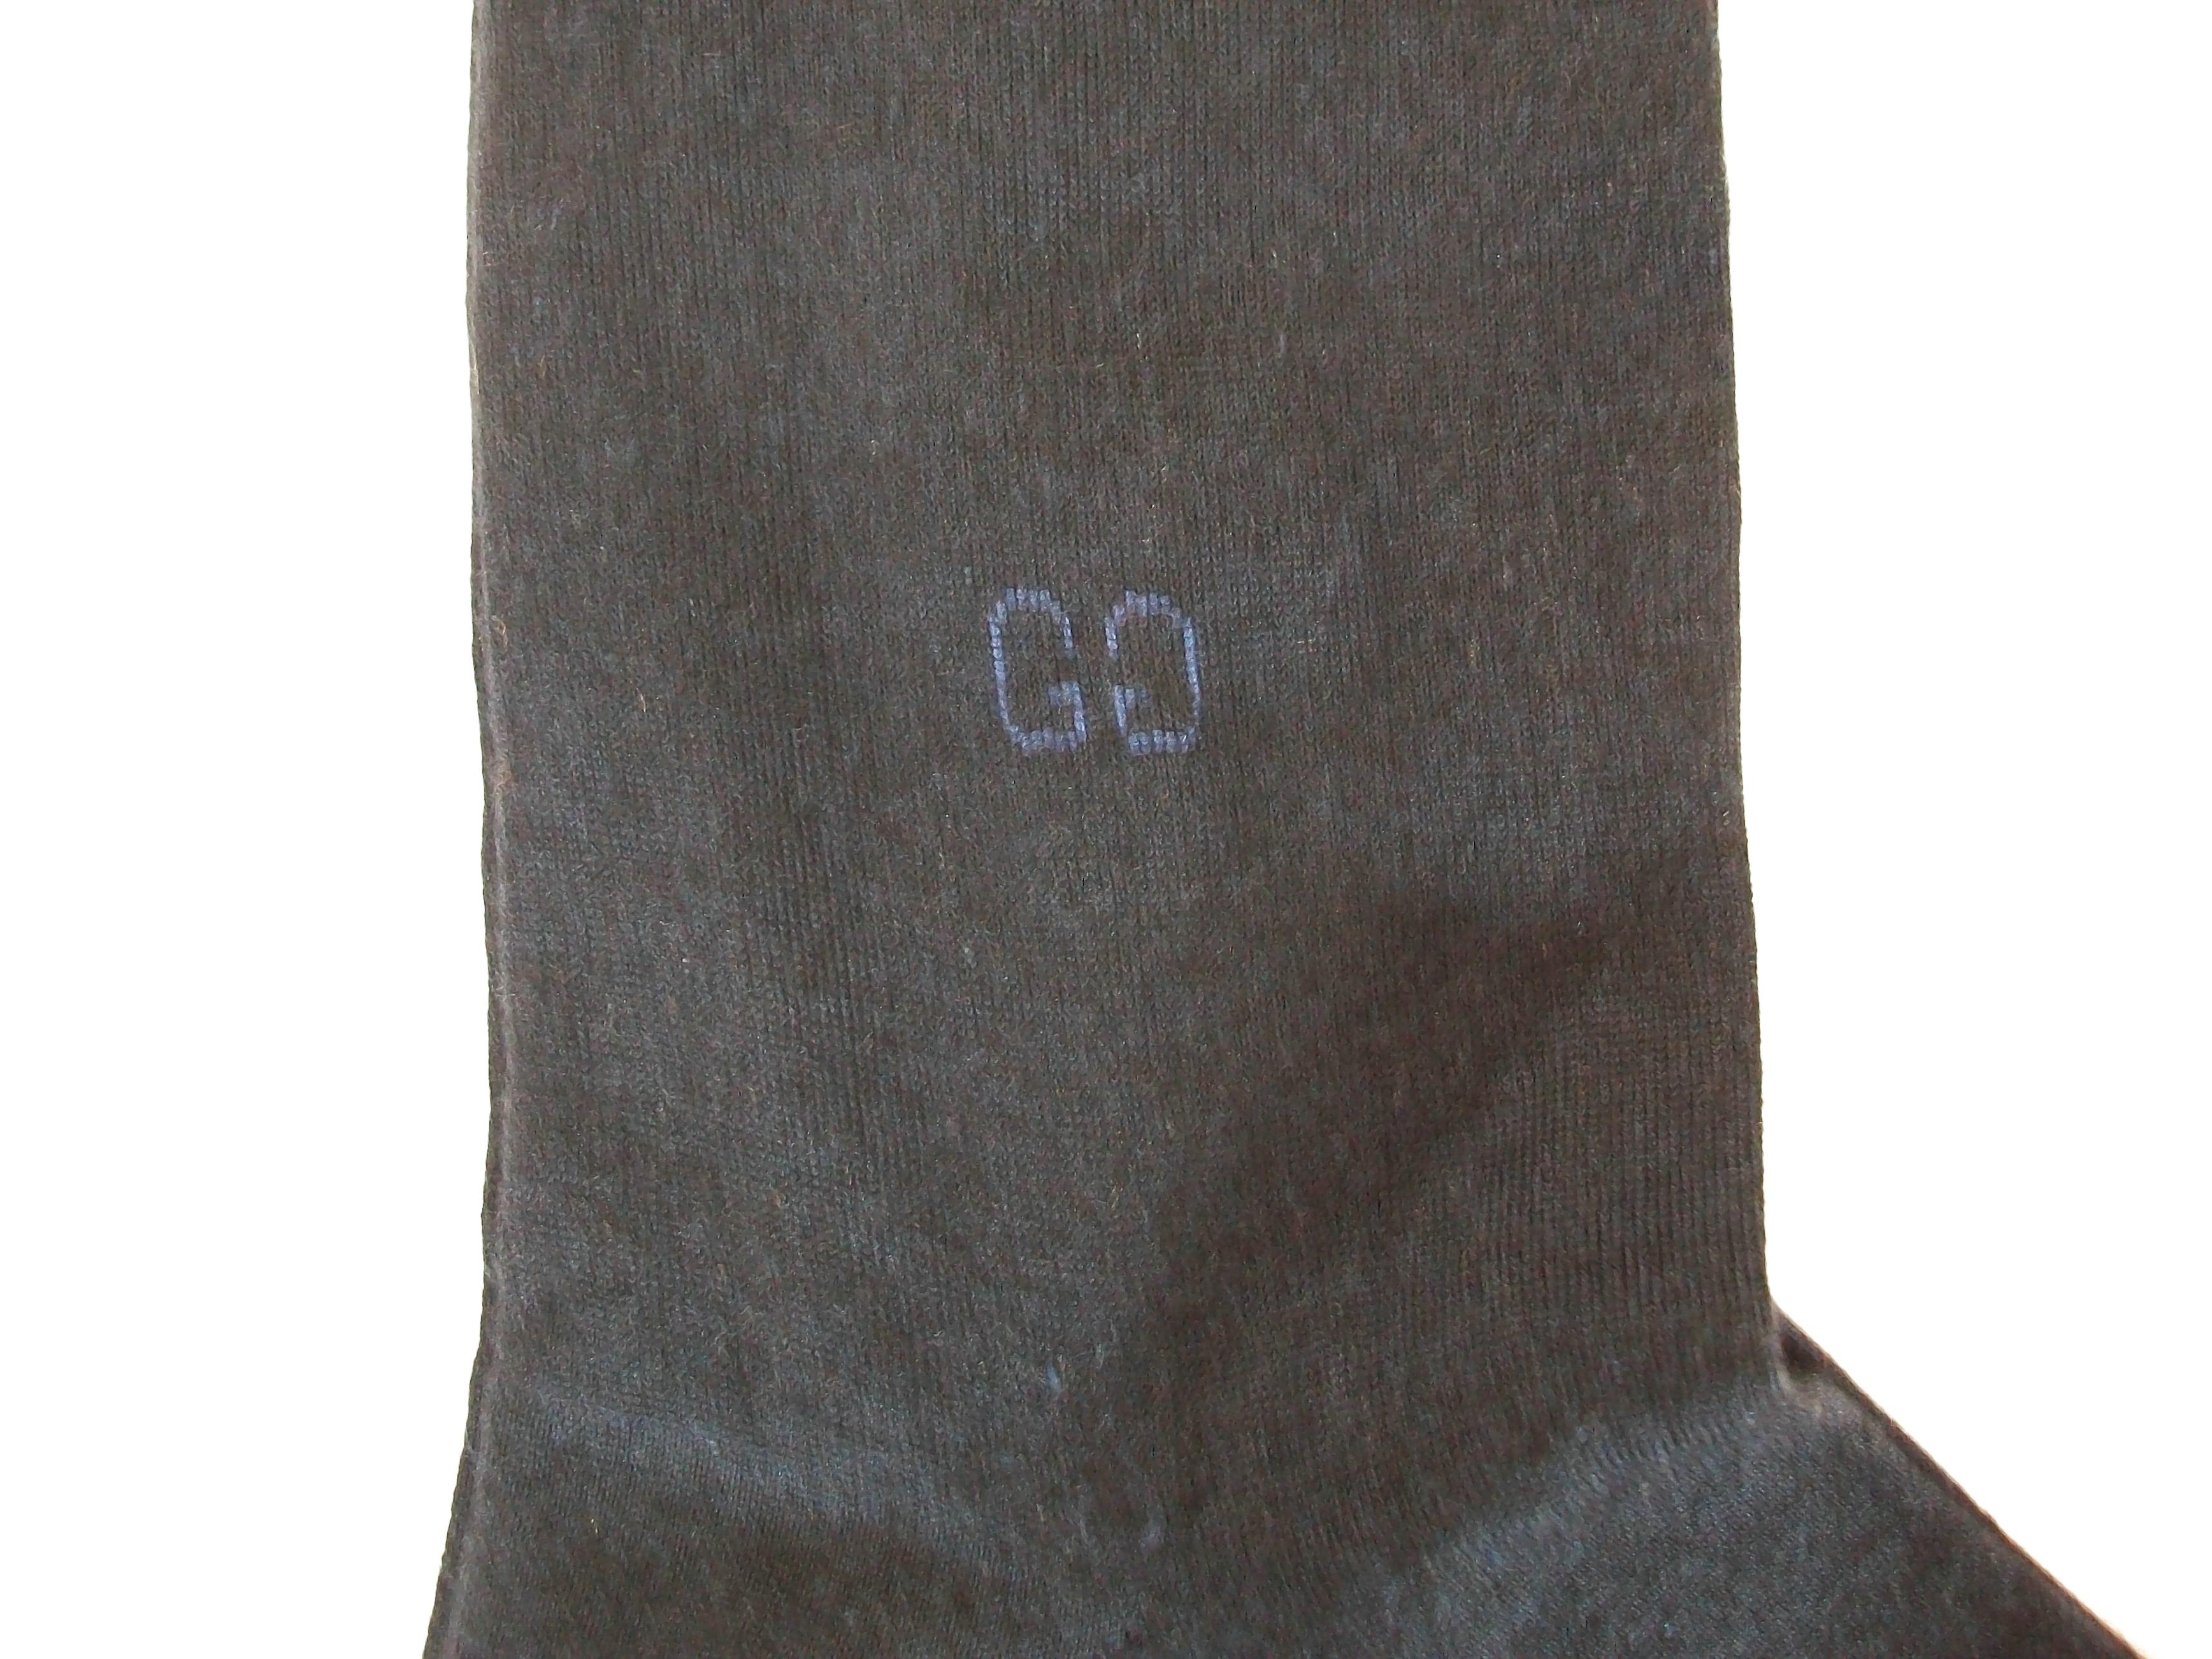 GUCCI - Men's Blue Cashmere & Silk Dress Socks - Size 11 - Italy - Circa 1980's In Excellent Condition For Sale In Chatham, ON